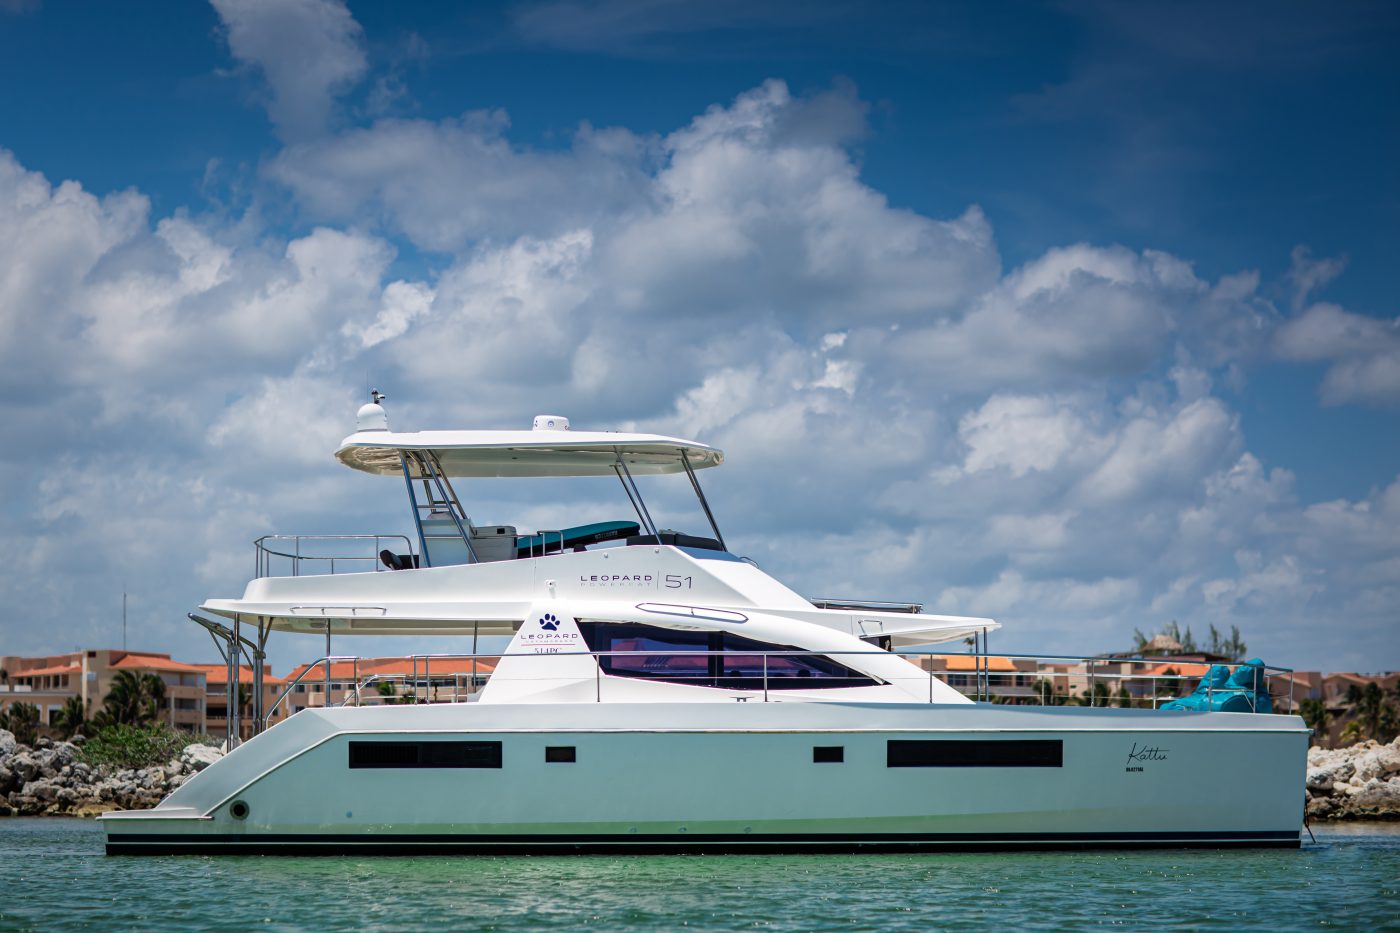 Leopard Catamaran for Luxury Yacht Charters from Puerto Aventuras Mexico